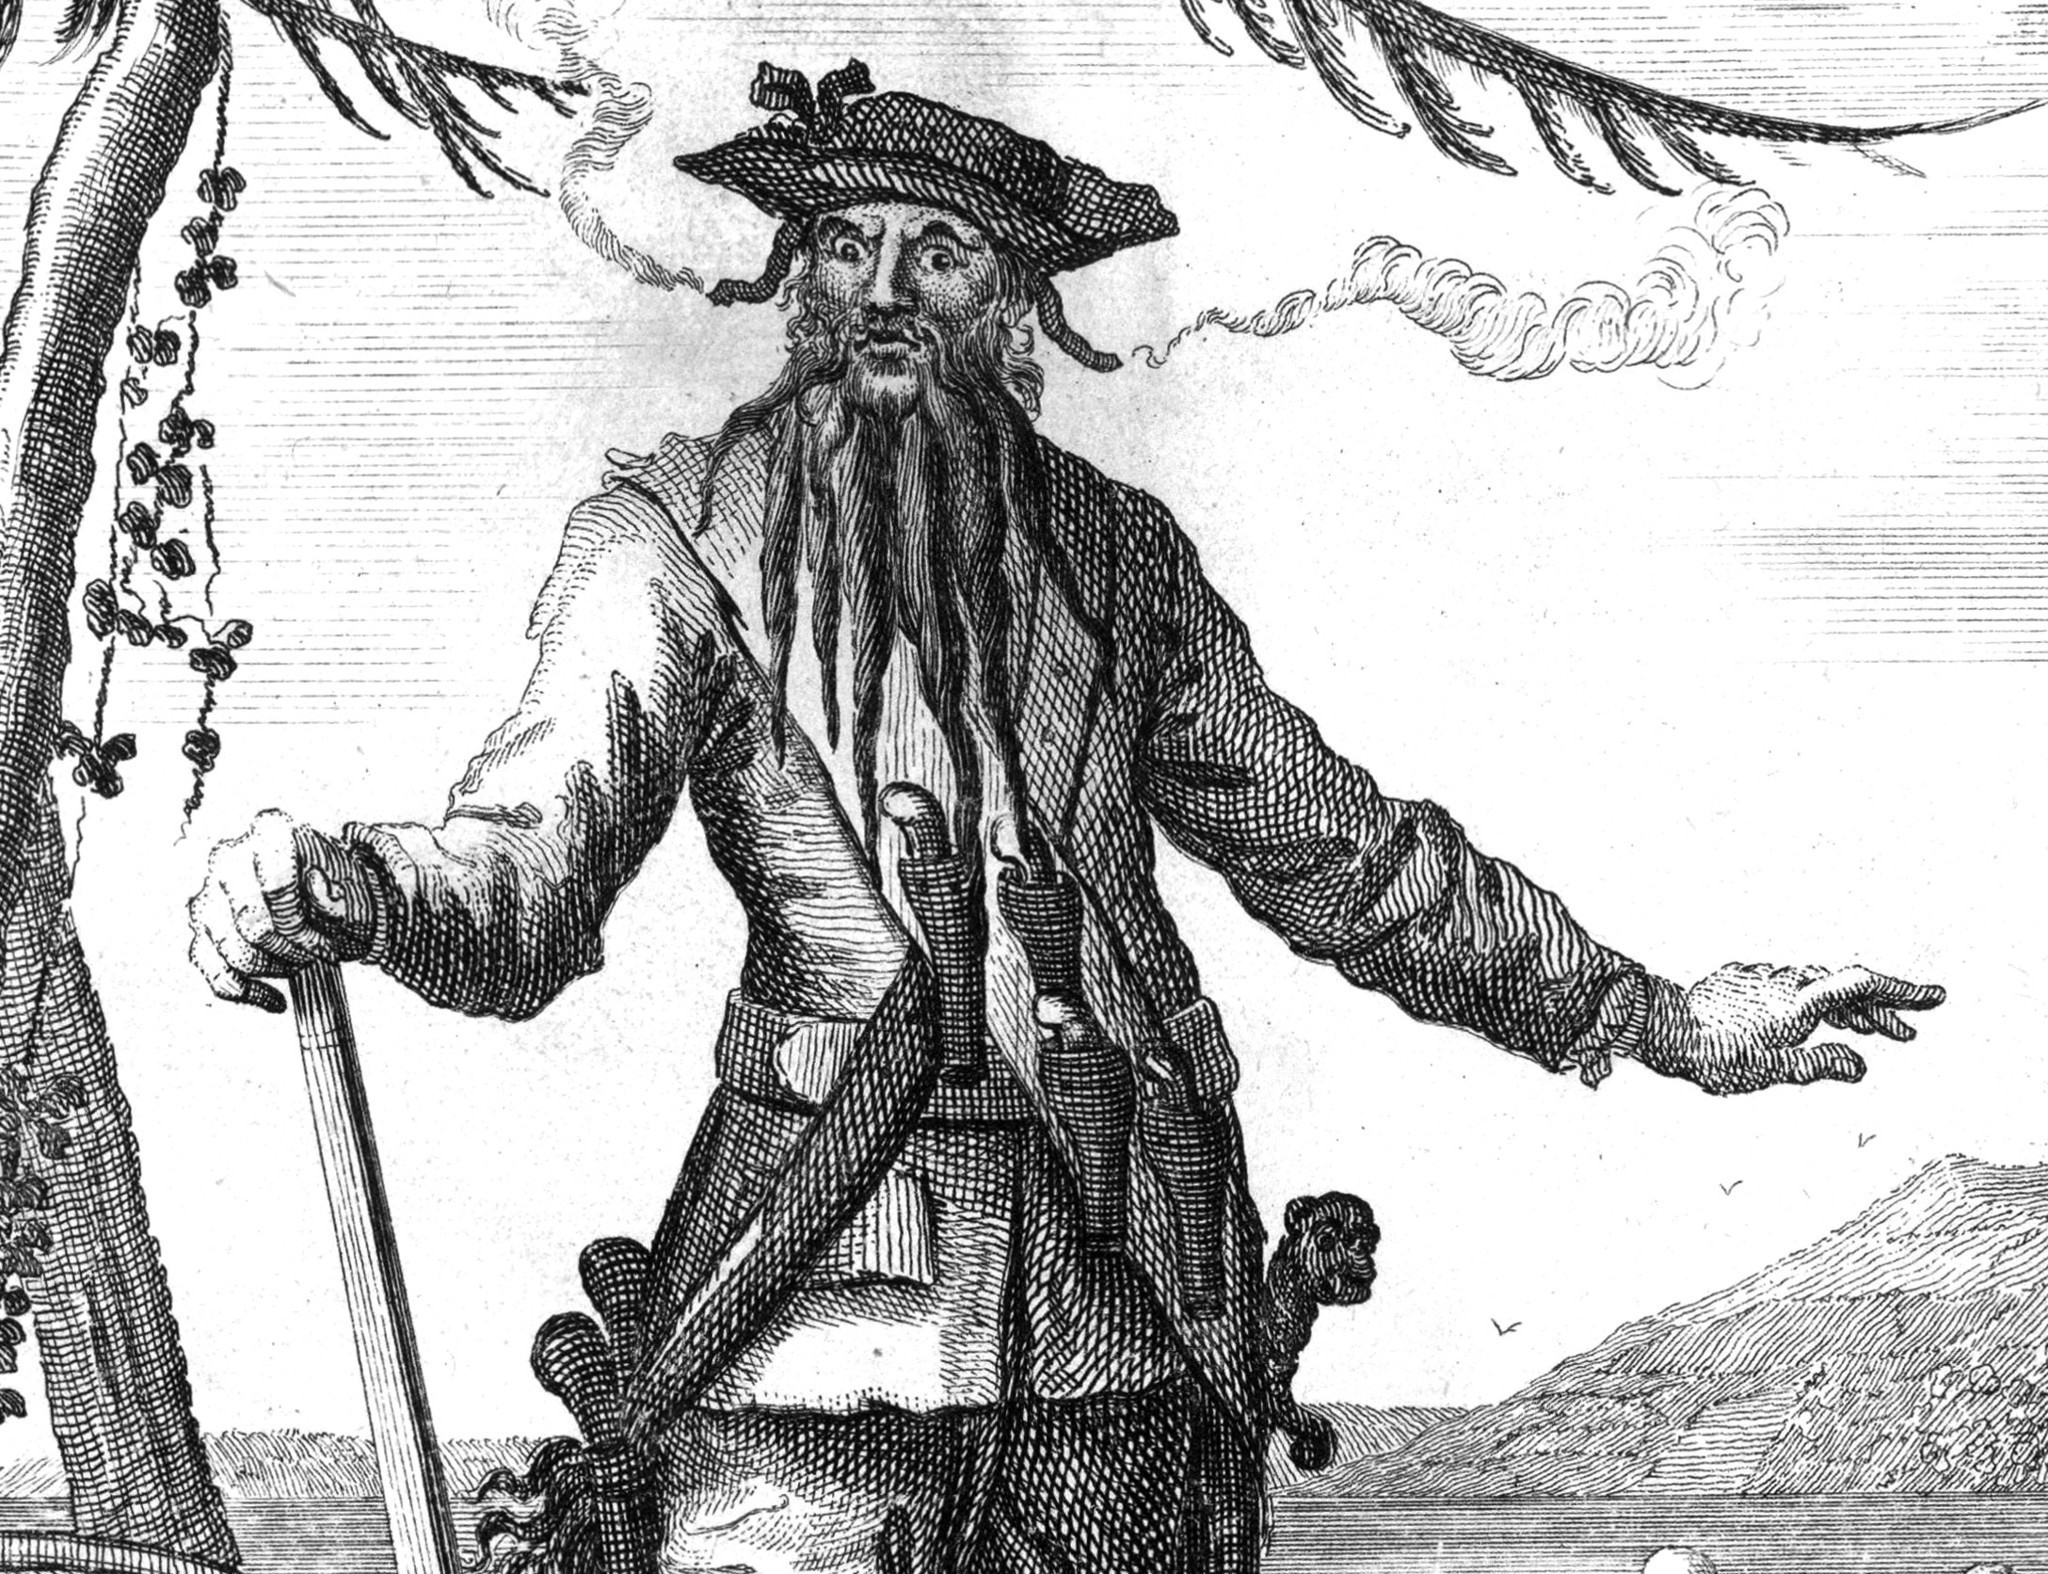 dp-legend-of-blackbeard-the-pirate-gets-a-few-new-wrinkles-from-north-carolina-author-20140527